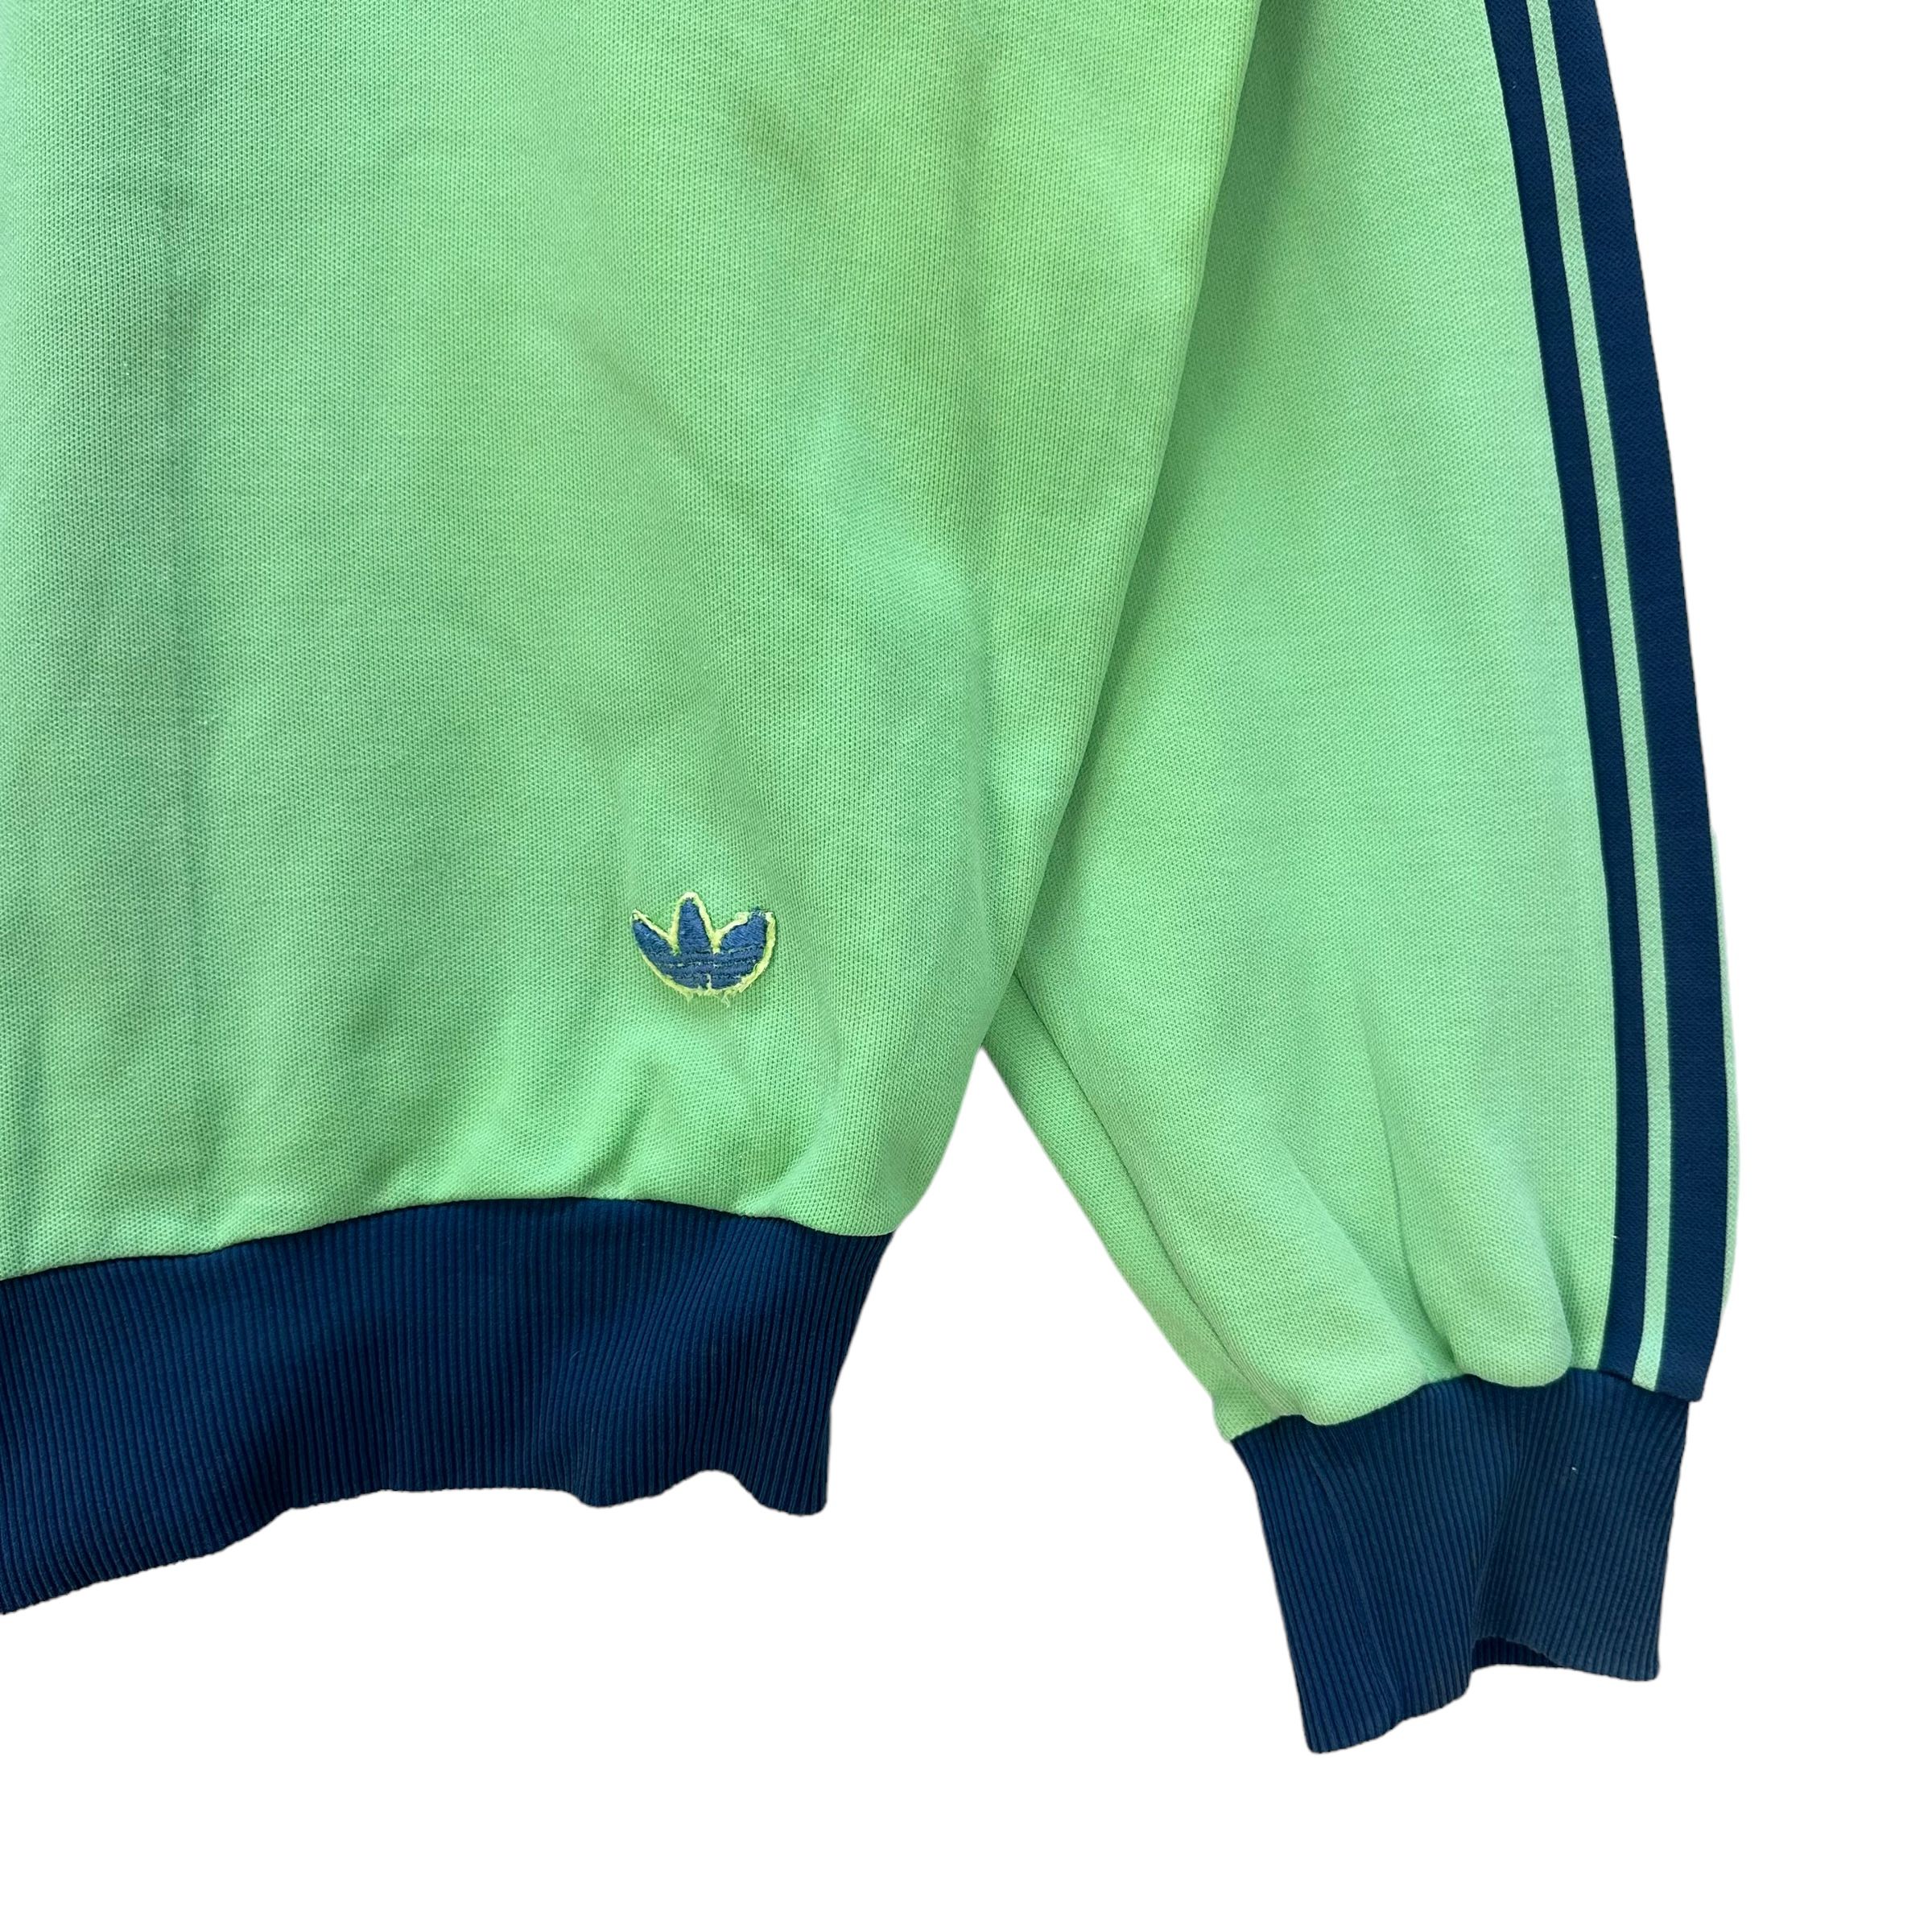 ADIDAS WEST GERMANY GREEN TRACK TOP JACKET #8817-028 - 7